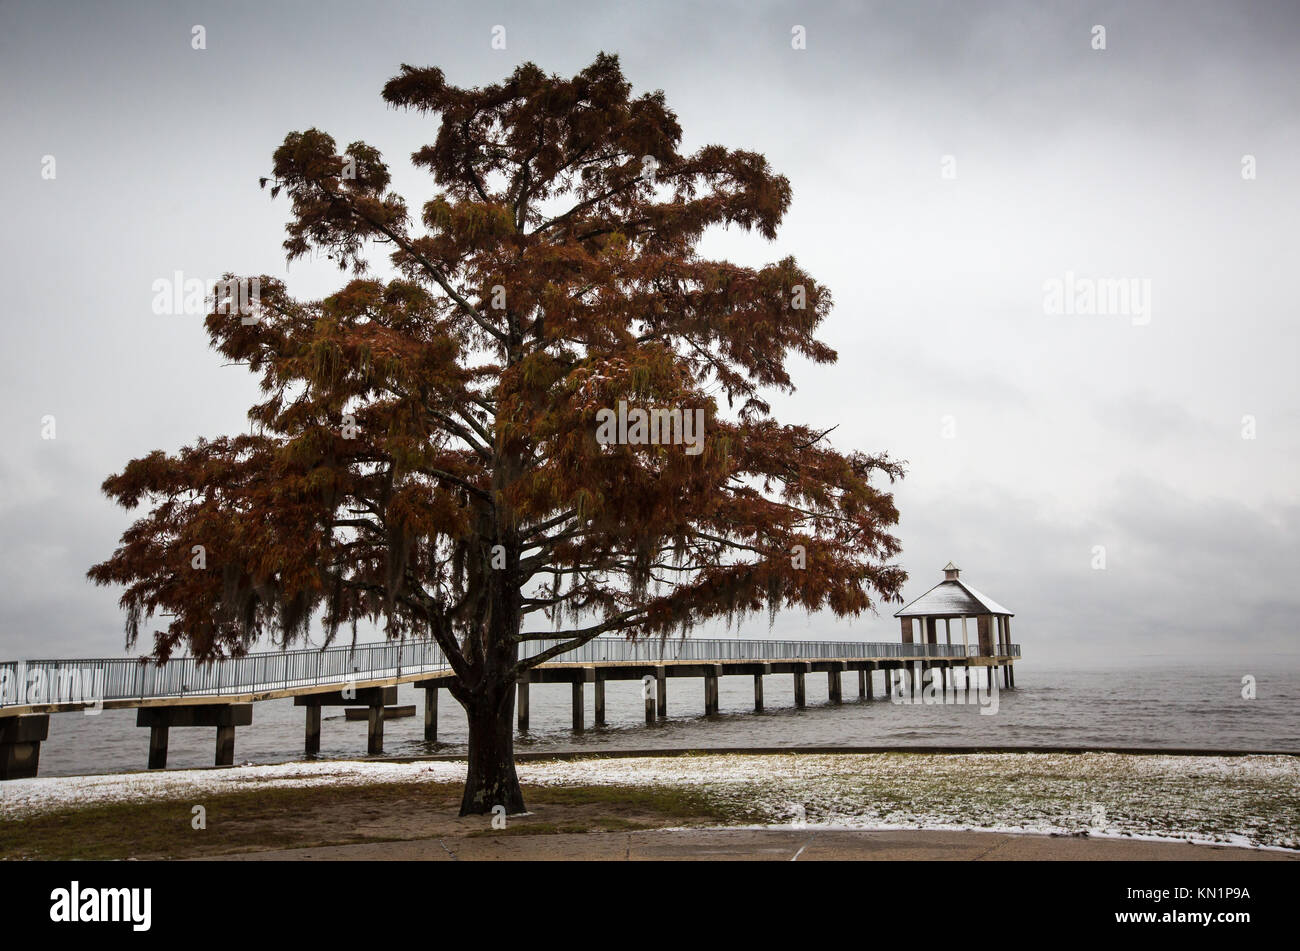 Mandeville, Louisiana, USA. 8th Dec, 2017. SNOW FALLS IN SOUTHERN LOUISIANA on the shore of Lake Pontchartrain in Fontainebleau State Park on Dec. 8, 2017. A wintry mix of precipitation fell across several Deep South states causing many businesses and schools to shut down. Credit: Julie Dermansky/ZUMA Wire/Alamy Live News Stock Photo